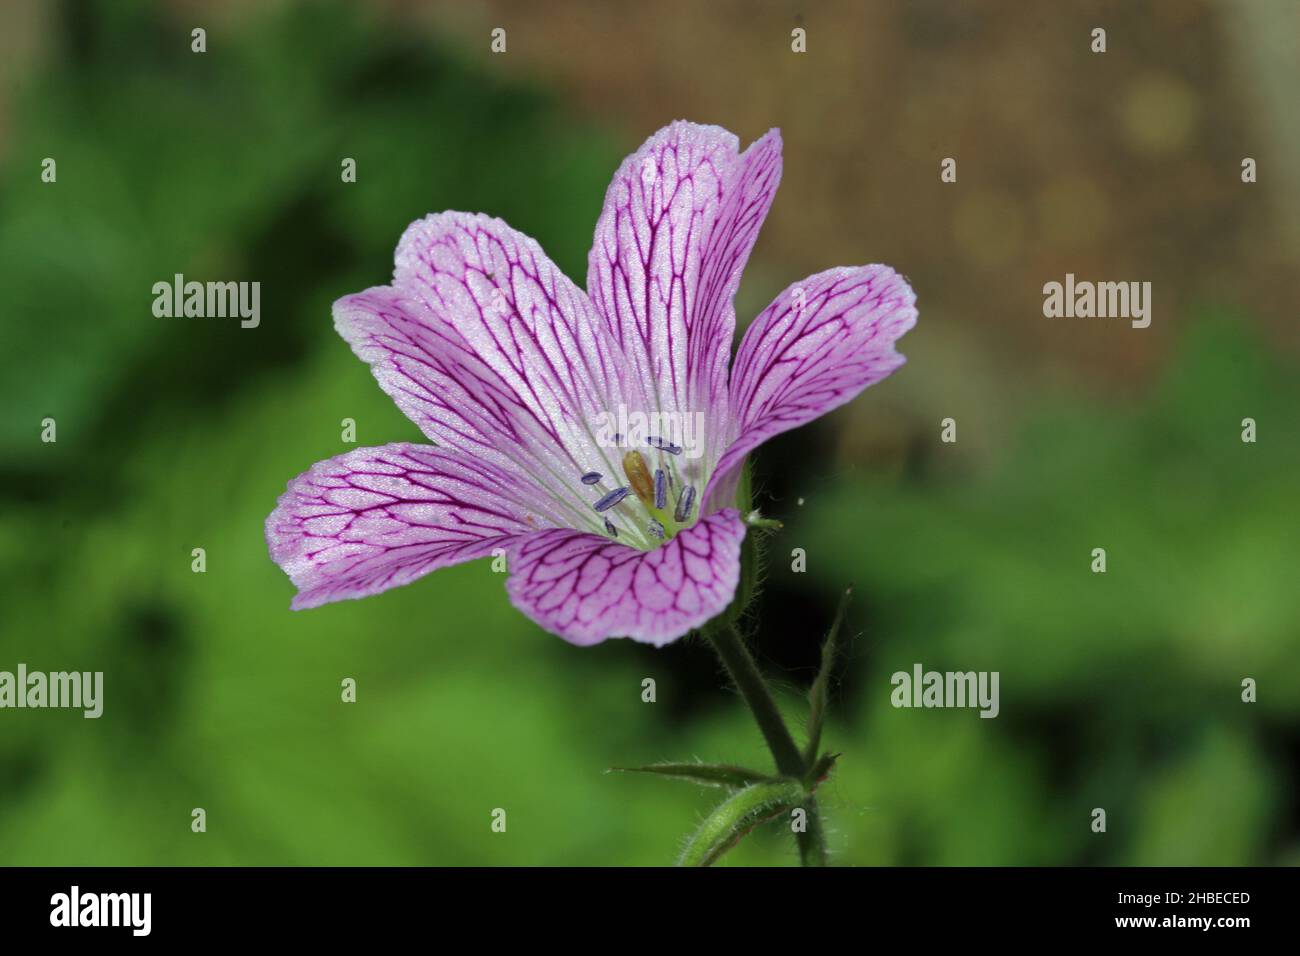 Pink cranesbill, Geranium unknown species and variety, flower with dark pink petal veins in close up with a background of blurred leaves. Stock Photo